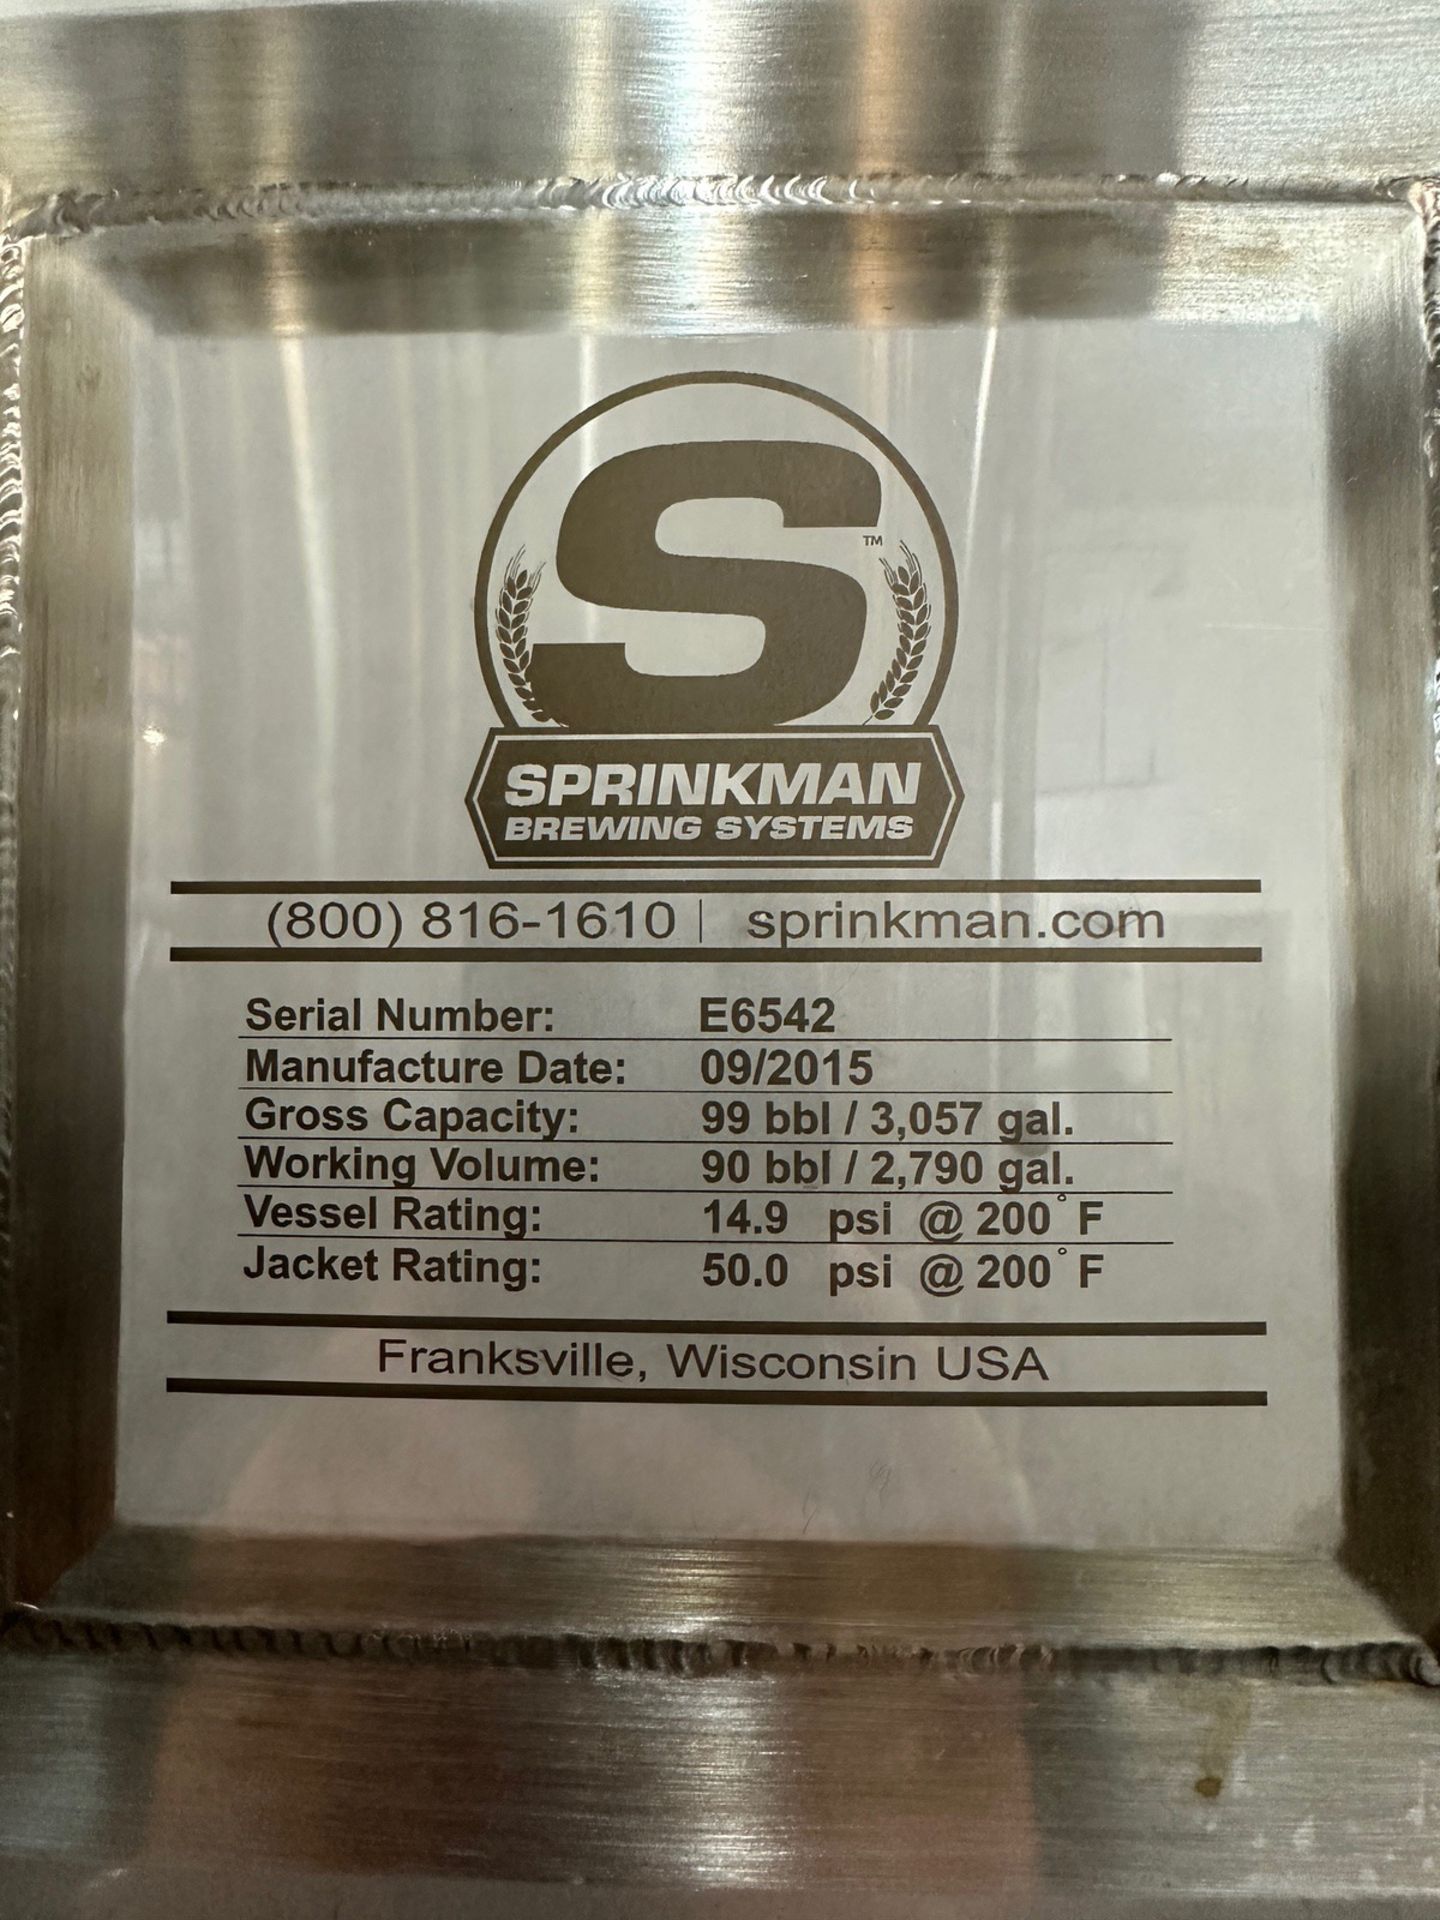 90 BBL Sprinkman Stainless Steel Brite Tank - Dish Bottom, Glycol Jacketed, Mandoor | Rig Fee $1750 - Image 2 of 2